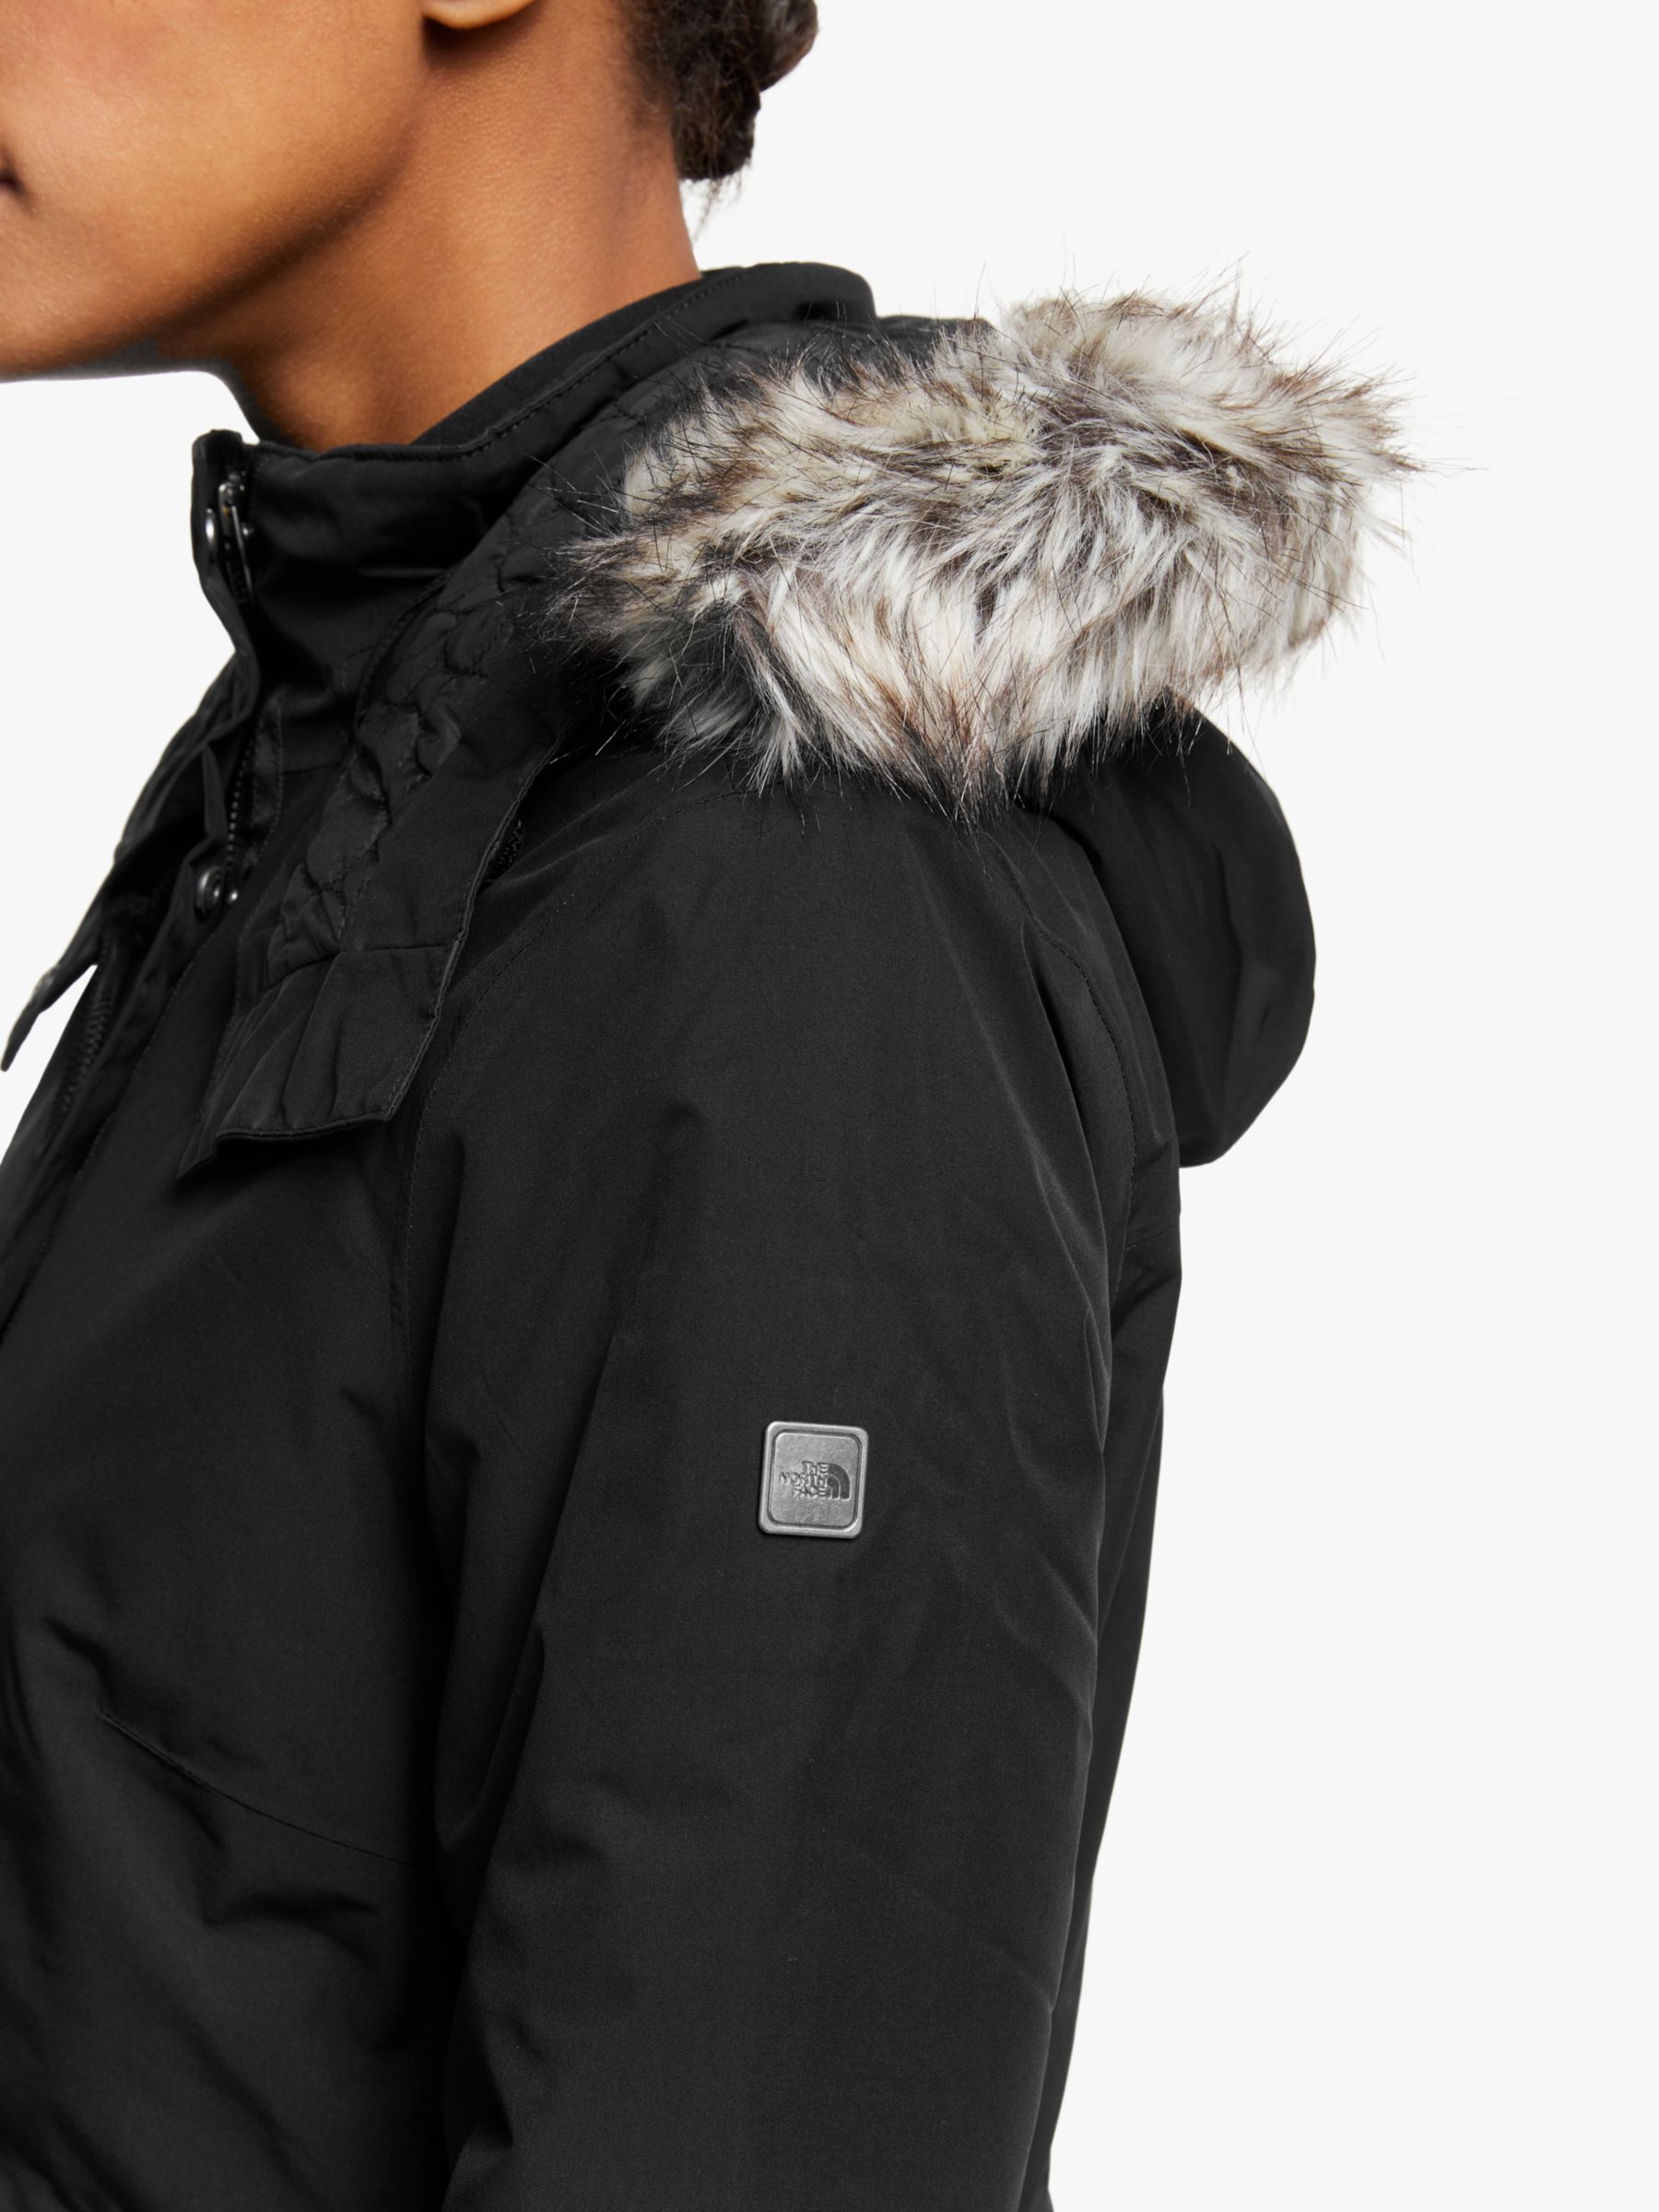 north face fur hooded jacket women's